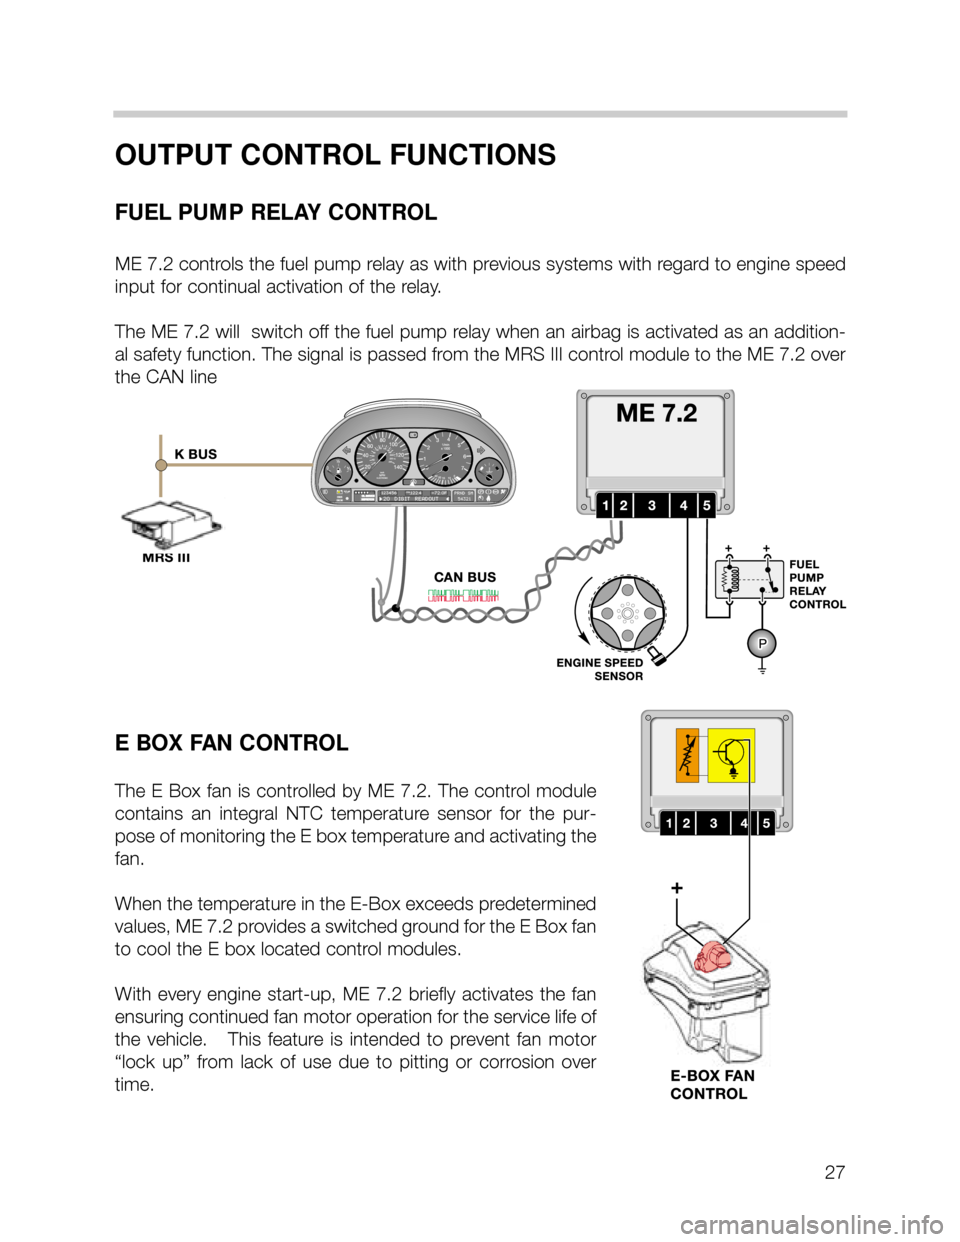 BMW 540i 2000 E39 M62TU Engine Owners Manual 27
OUTPUT CONTROL FUNCTIONS
FUEL PUMP RELAY CONTROL
ME 7.2 controls the fuel pump relay as with previous systems with regard to engine speed
input for continual activation of the relay.  
The ME 7.2 w